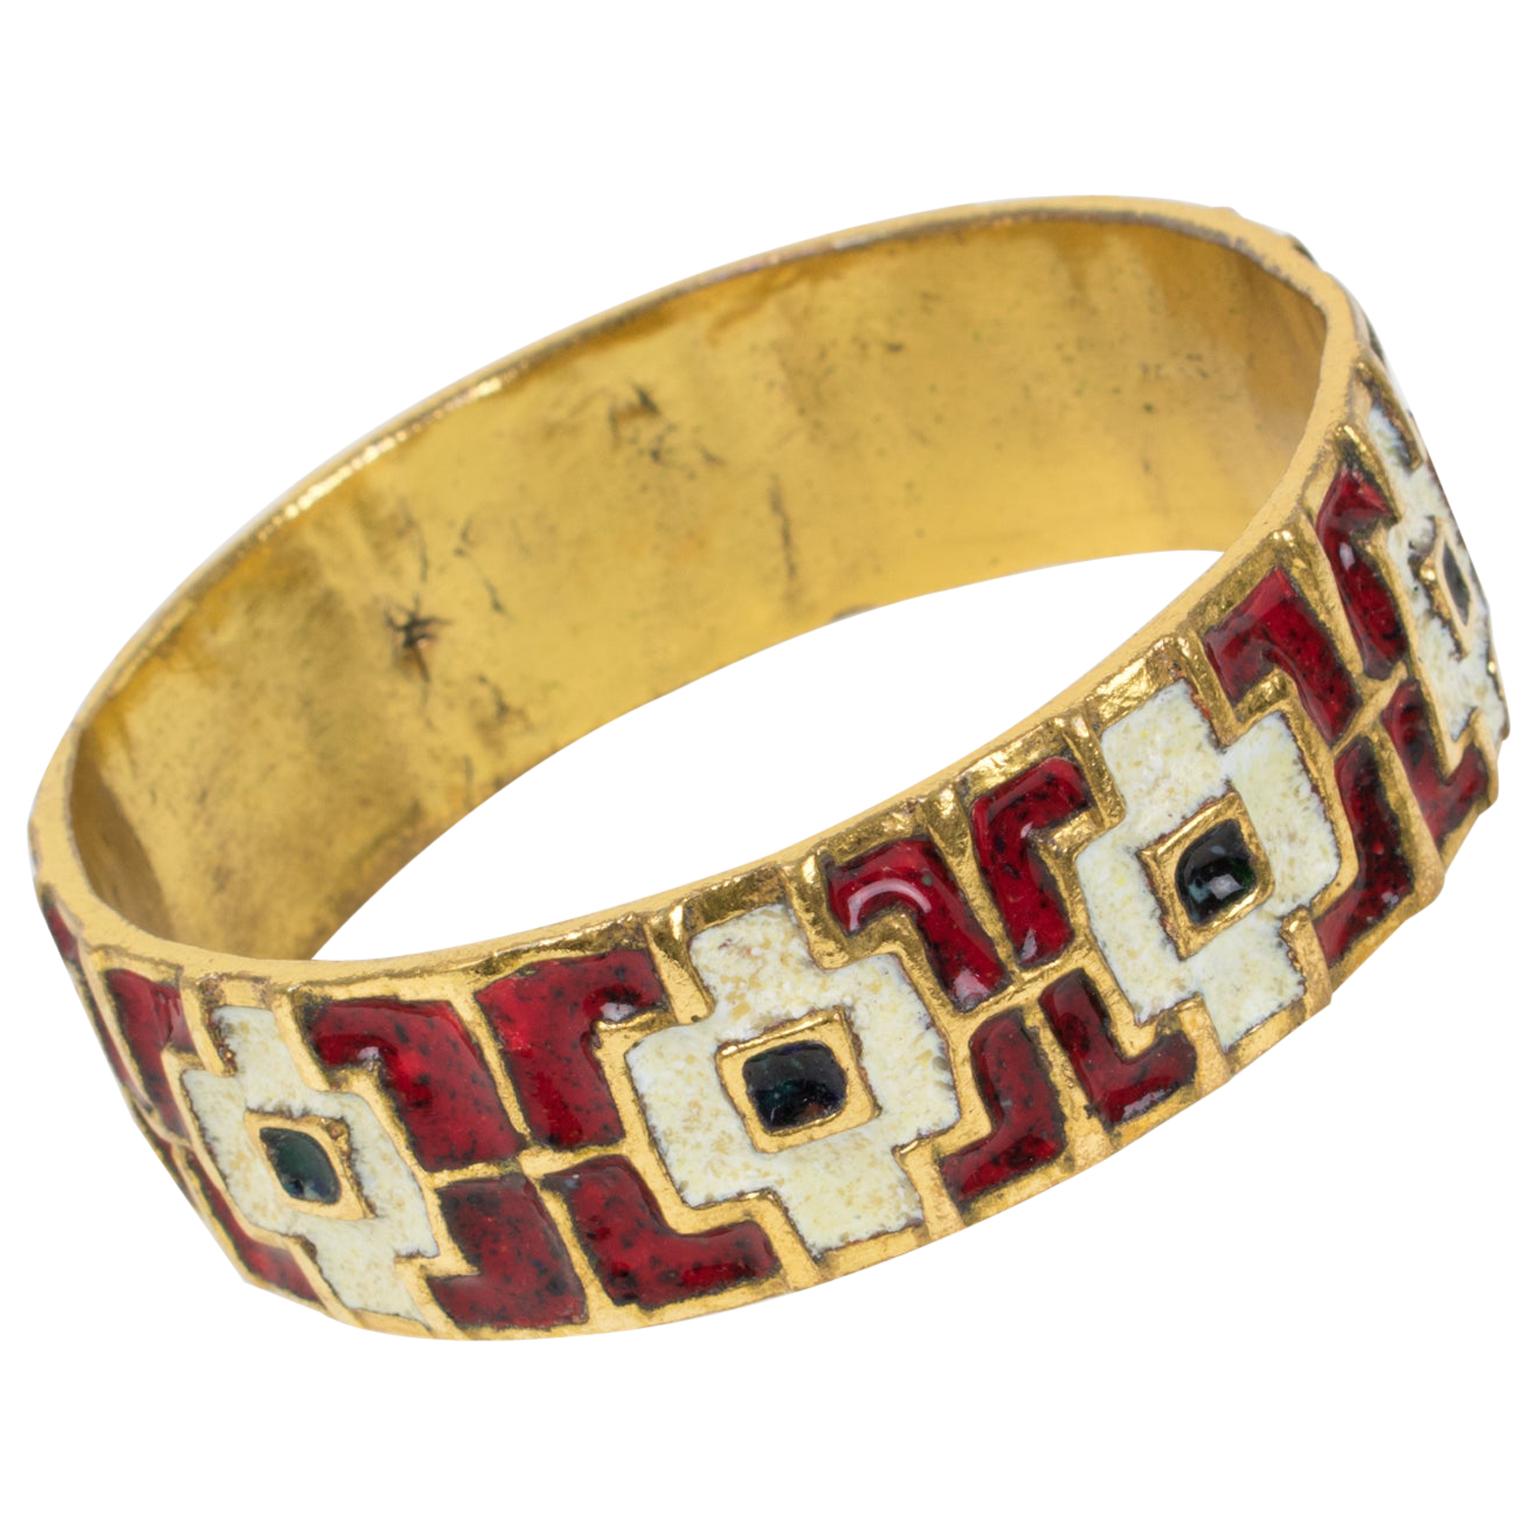 French Mid Century Modern Bronze Bracelet Bangle with Red and White Enamel For Sale